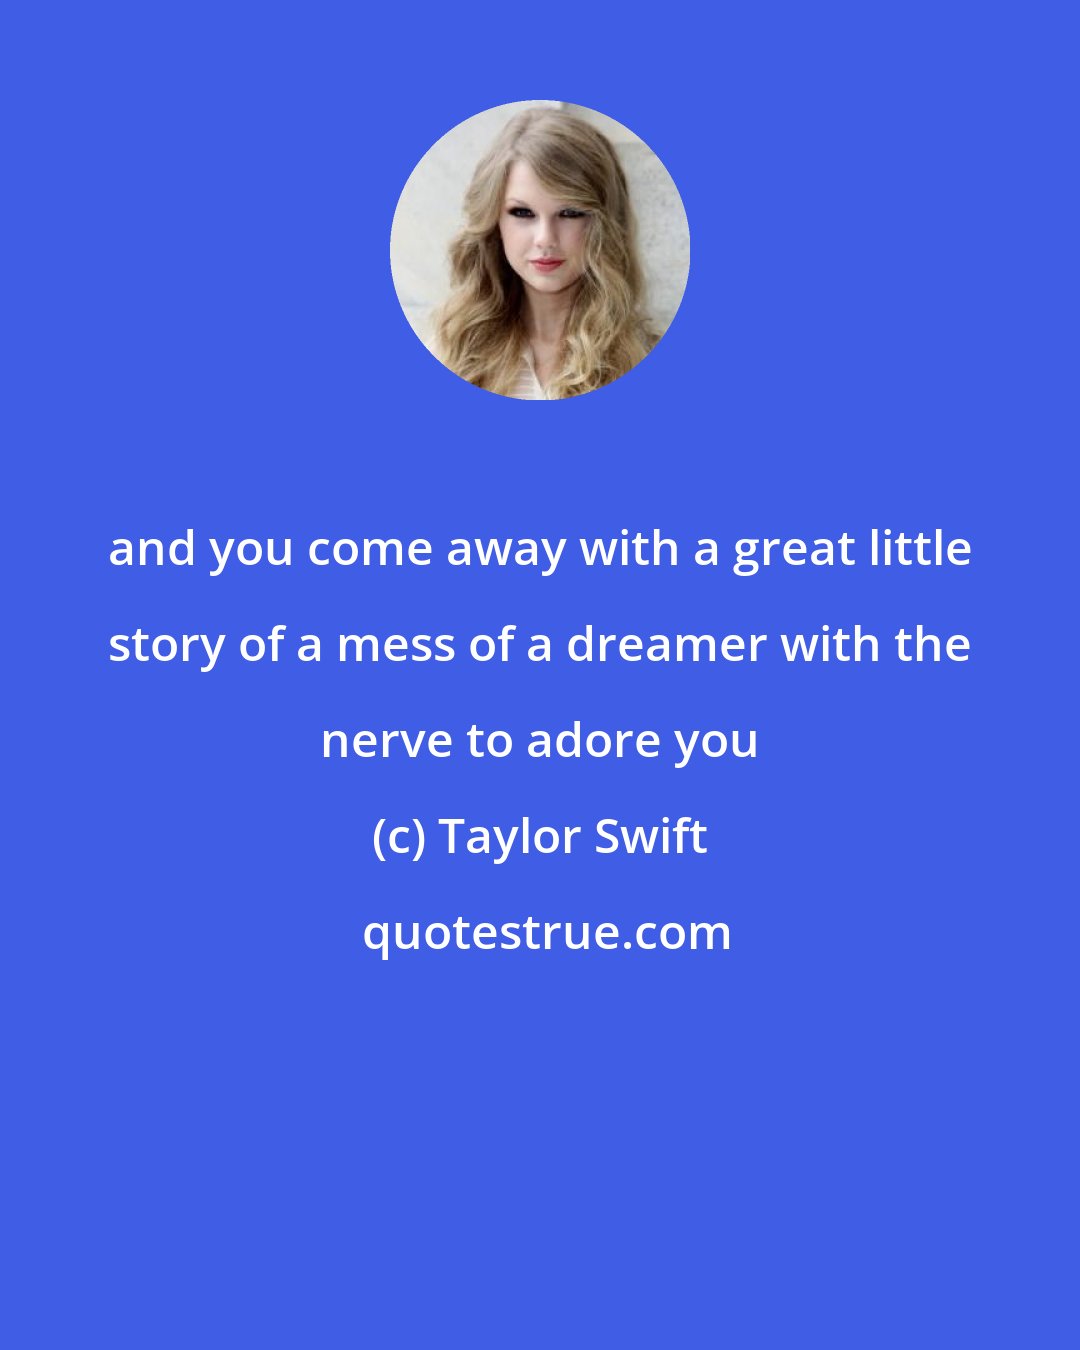 Taylor Swift: and you come away with a great little story of a mess of a dreamer with the nerve to adore you